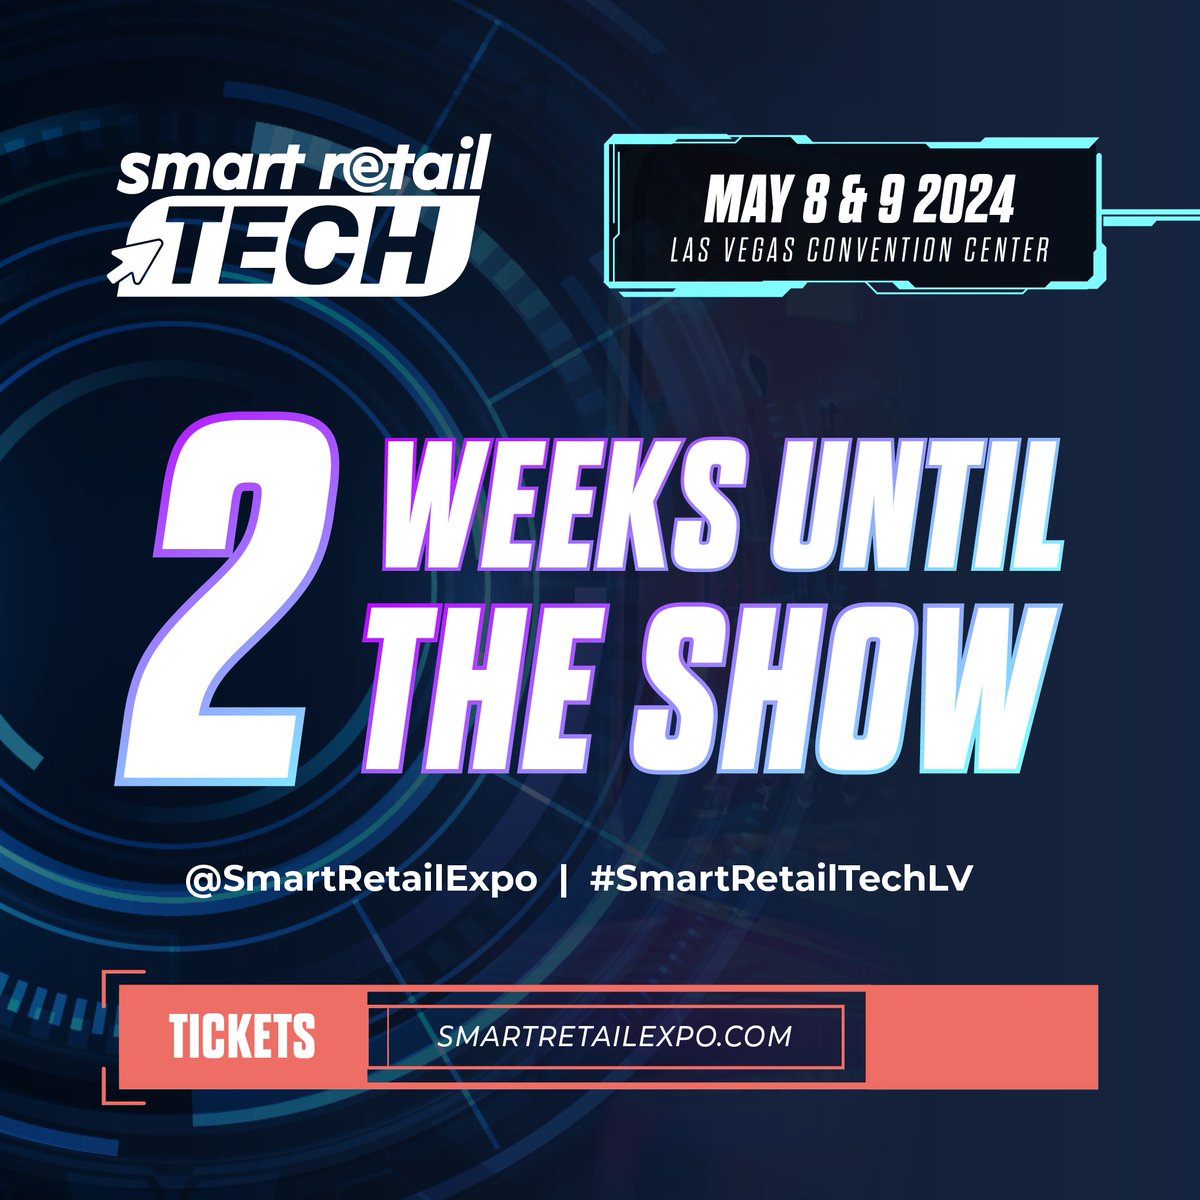 XR Women has partnered with Smart Retail Tech Expo! Join us for a dynamic event uniting retail tech leaders, featuring keynote speakers from Target, Google, Lenovo, and more. Get your FREE ticket using promo code XRWomen100: shorturl.at/lquxy #XRWomen #SmartRetailTechLV